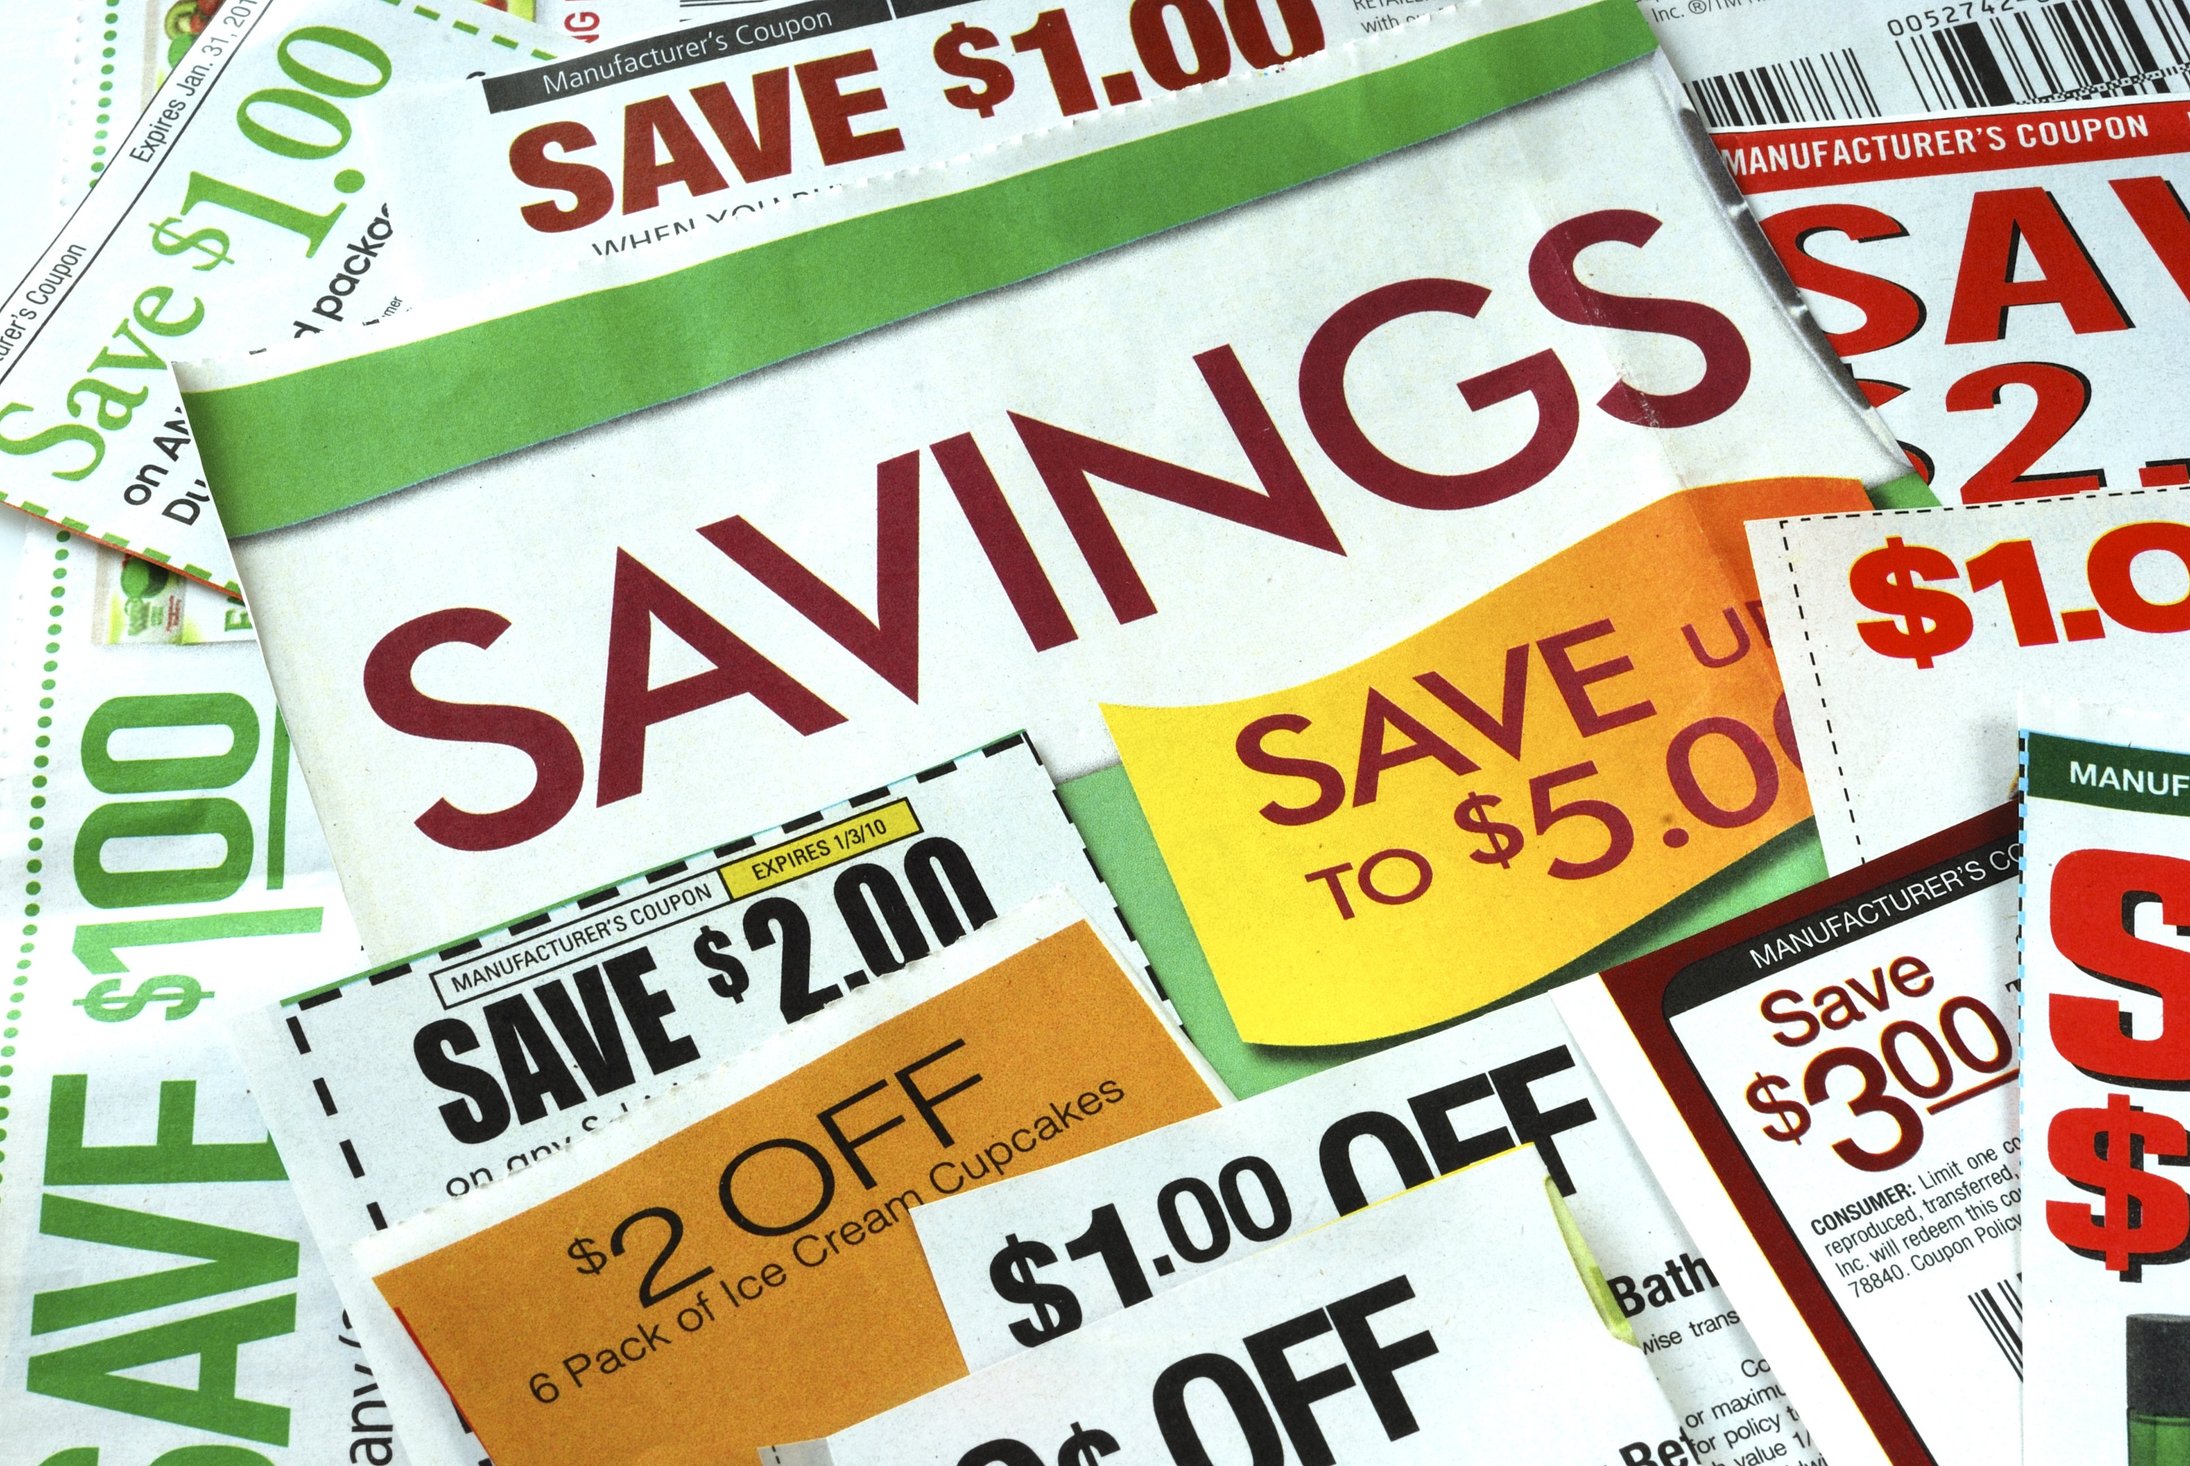 Money coupon photo. Coupon for Lesson. Saving money eat sale foods. Can you me some money